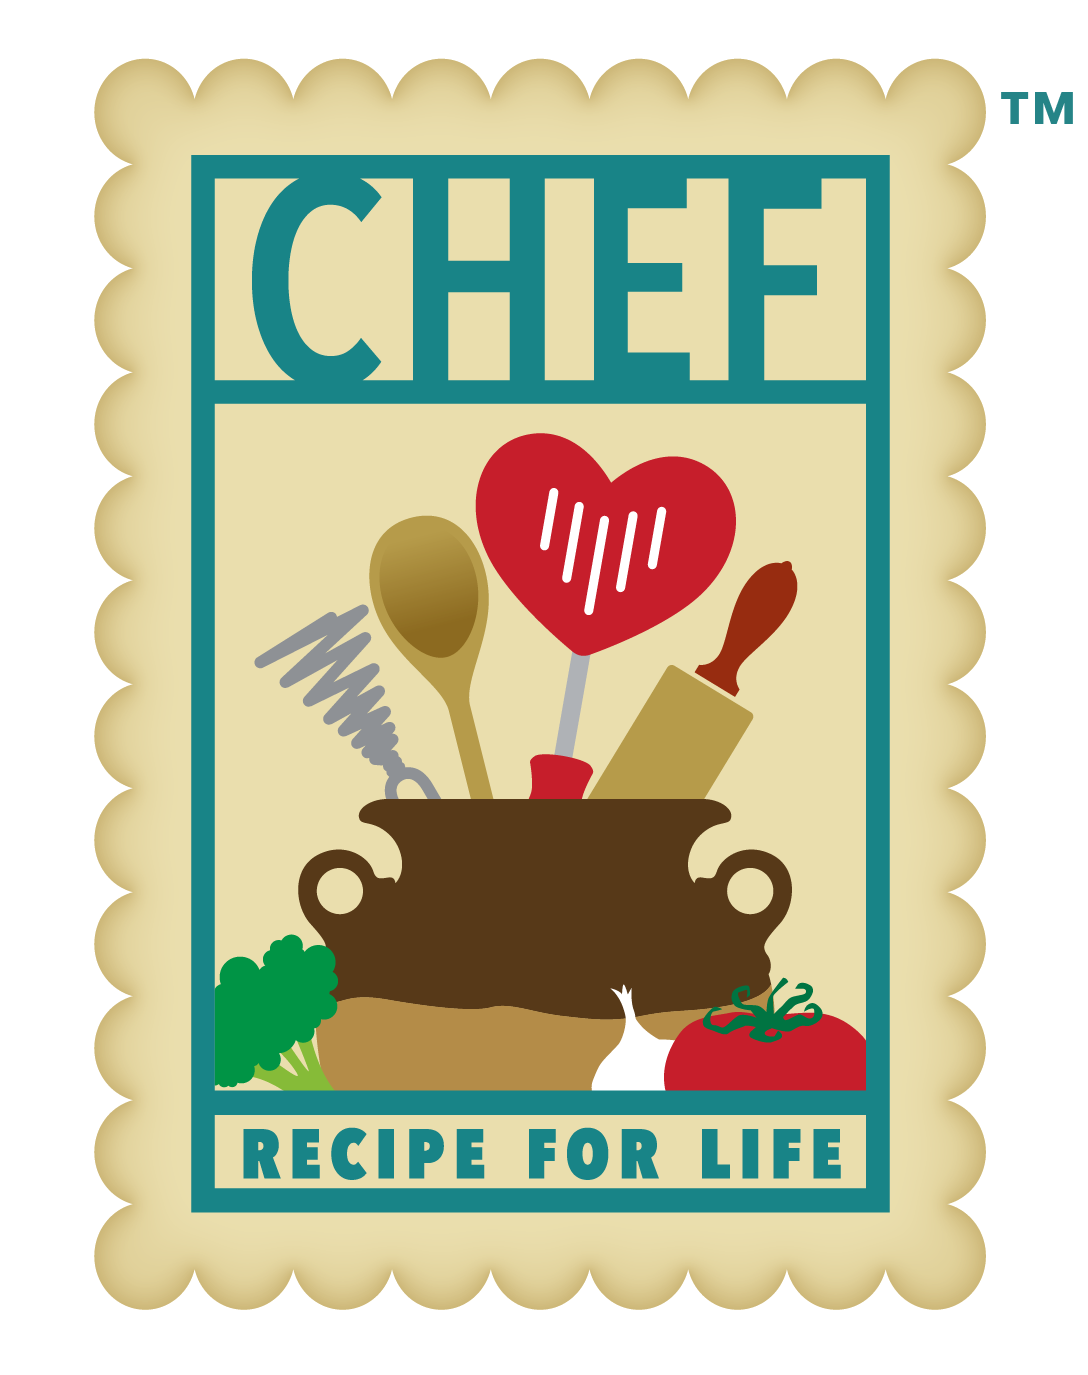 CHEF® (Culinary Health Education for Families) logo